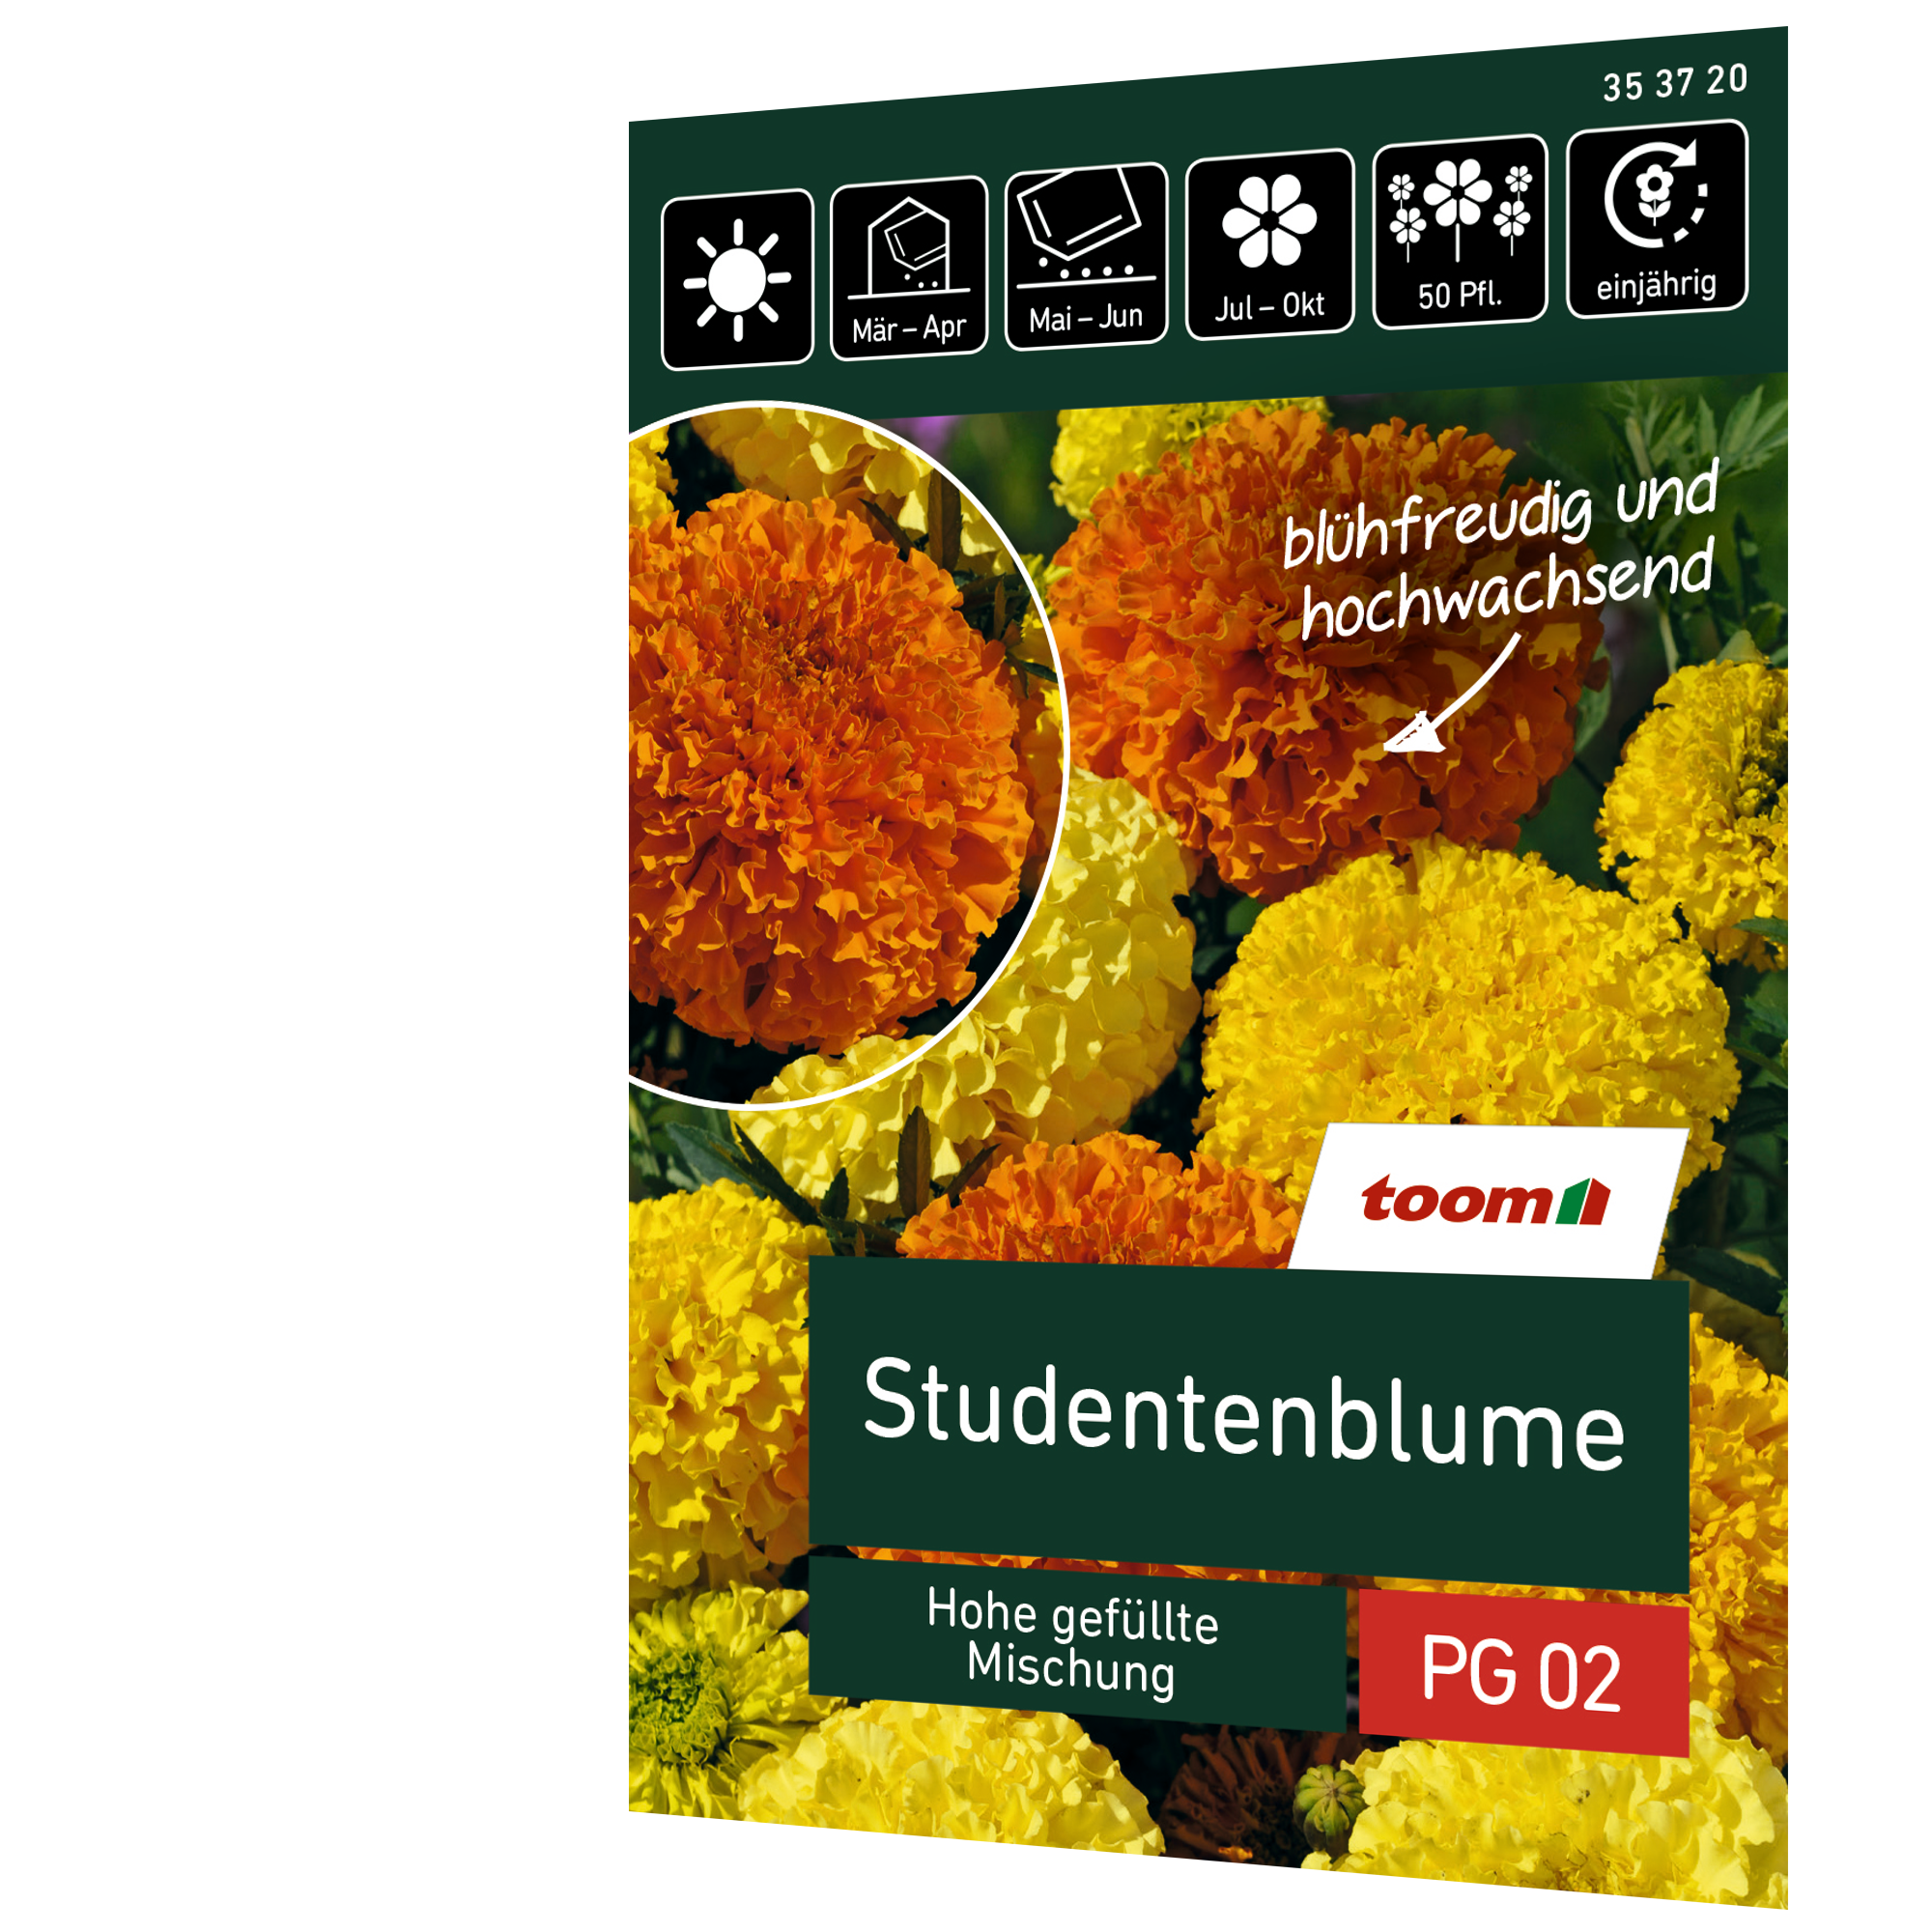 Studentenblume 'Hohe gefüllte Mischung' + product picture